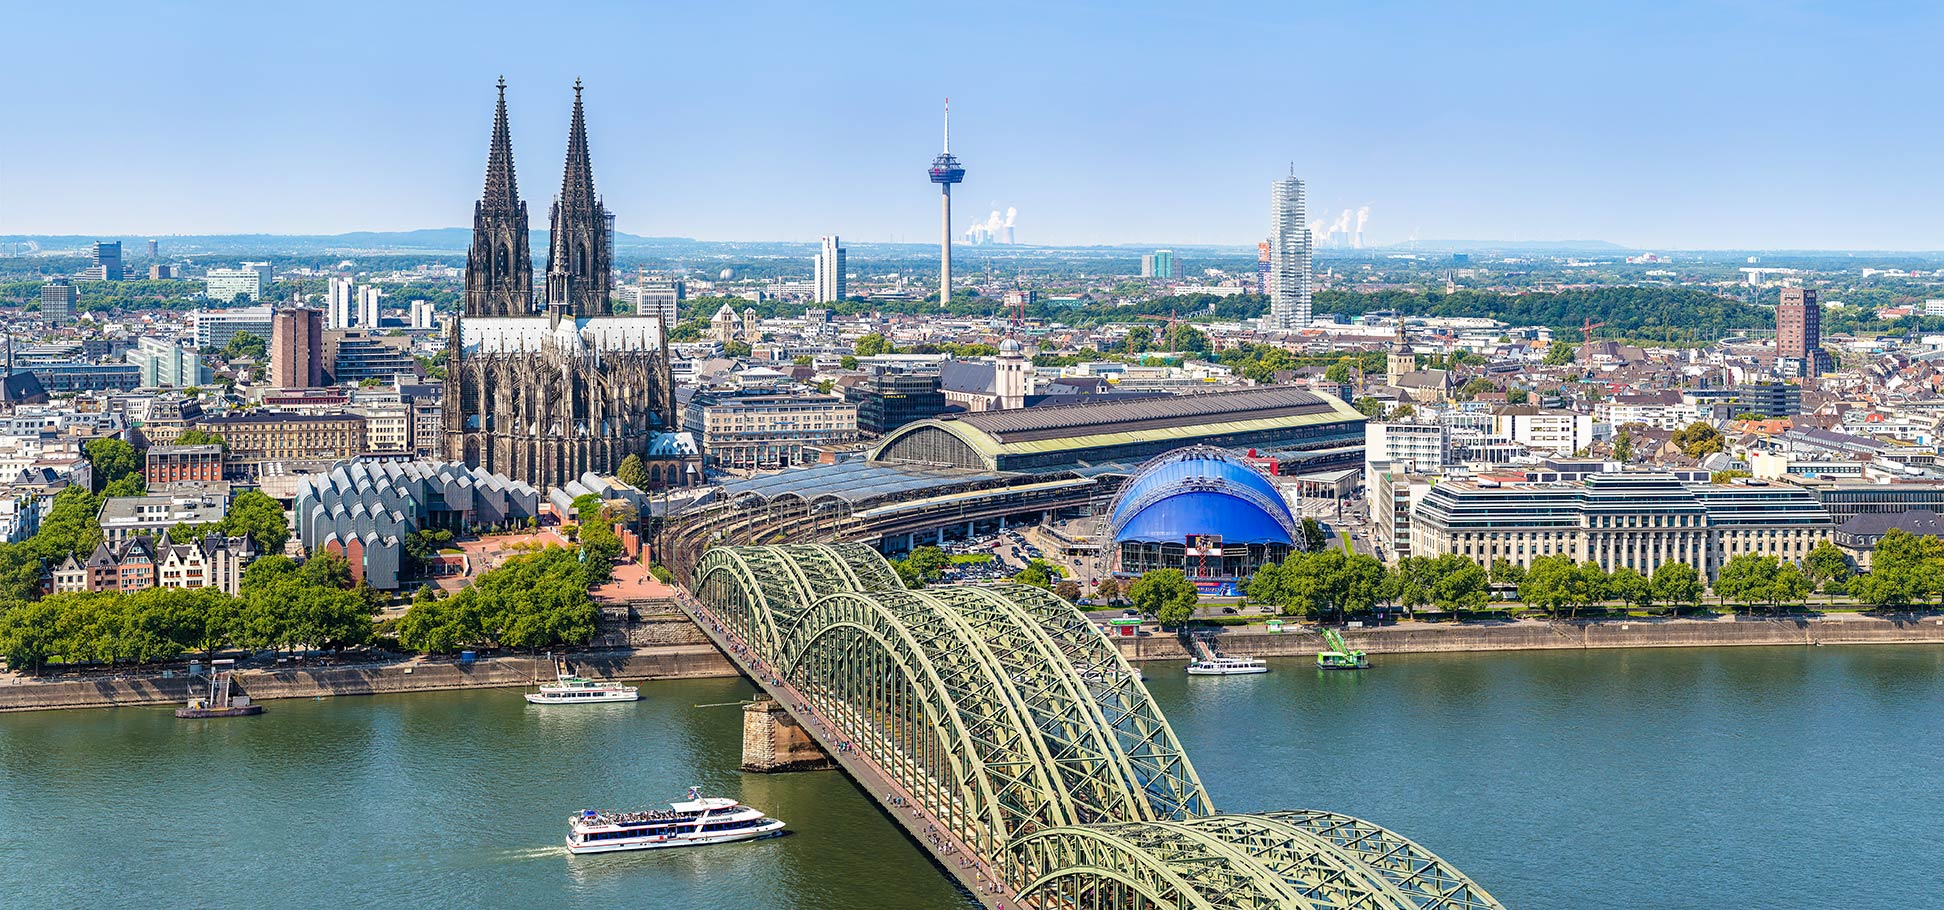 The center of Cologne (Köln) at the River Rhine with the Dom, the Cologne cathedral.